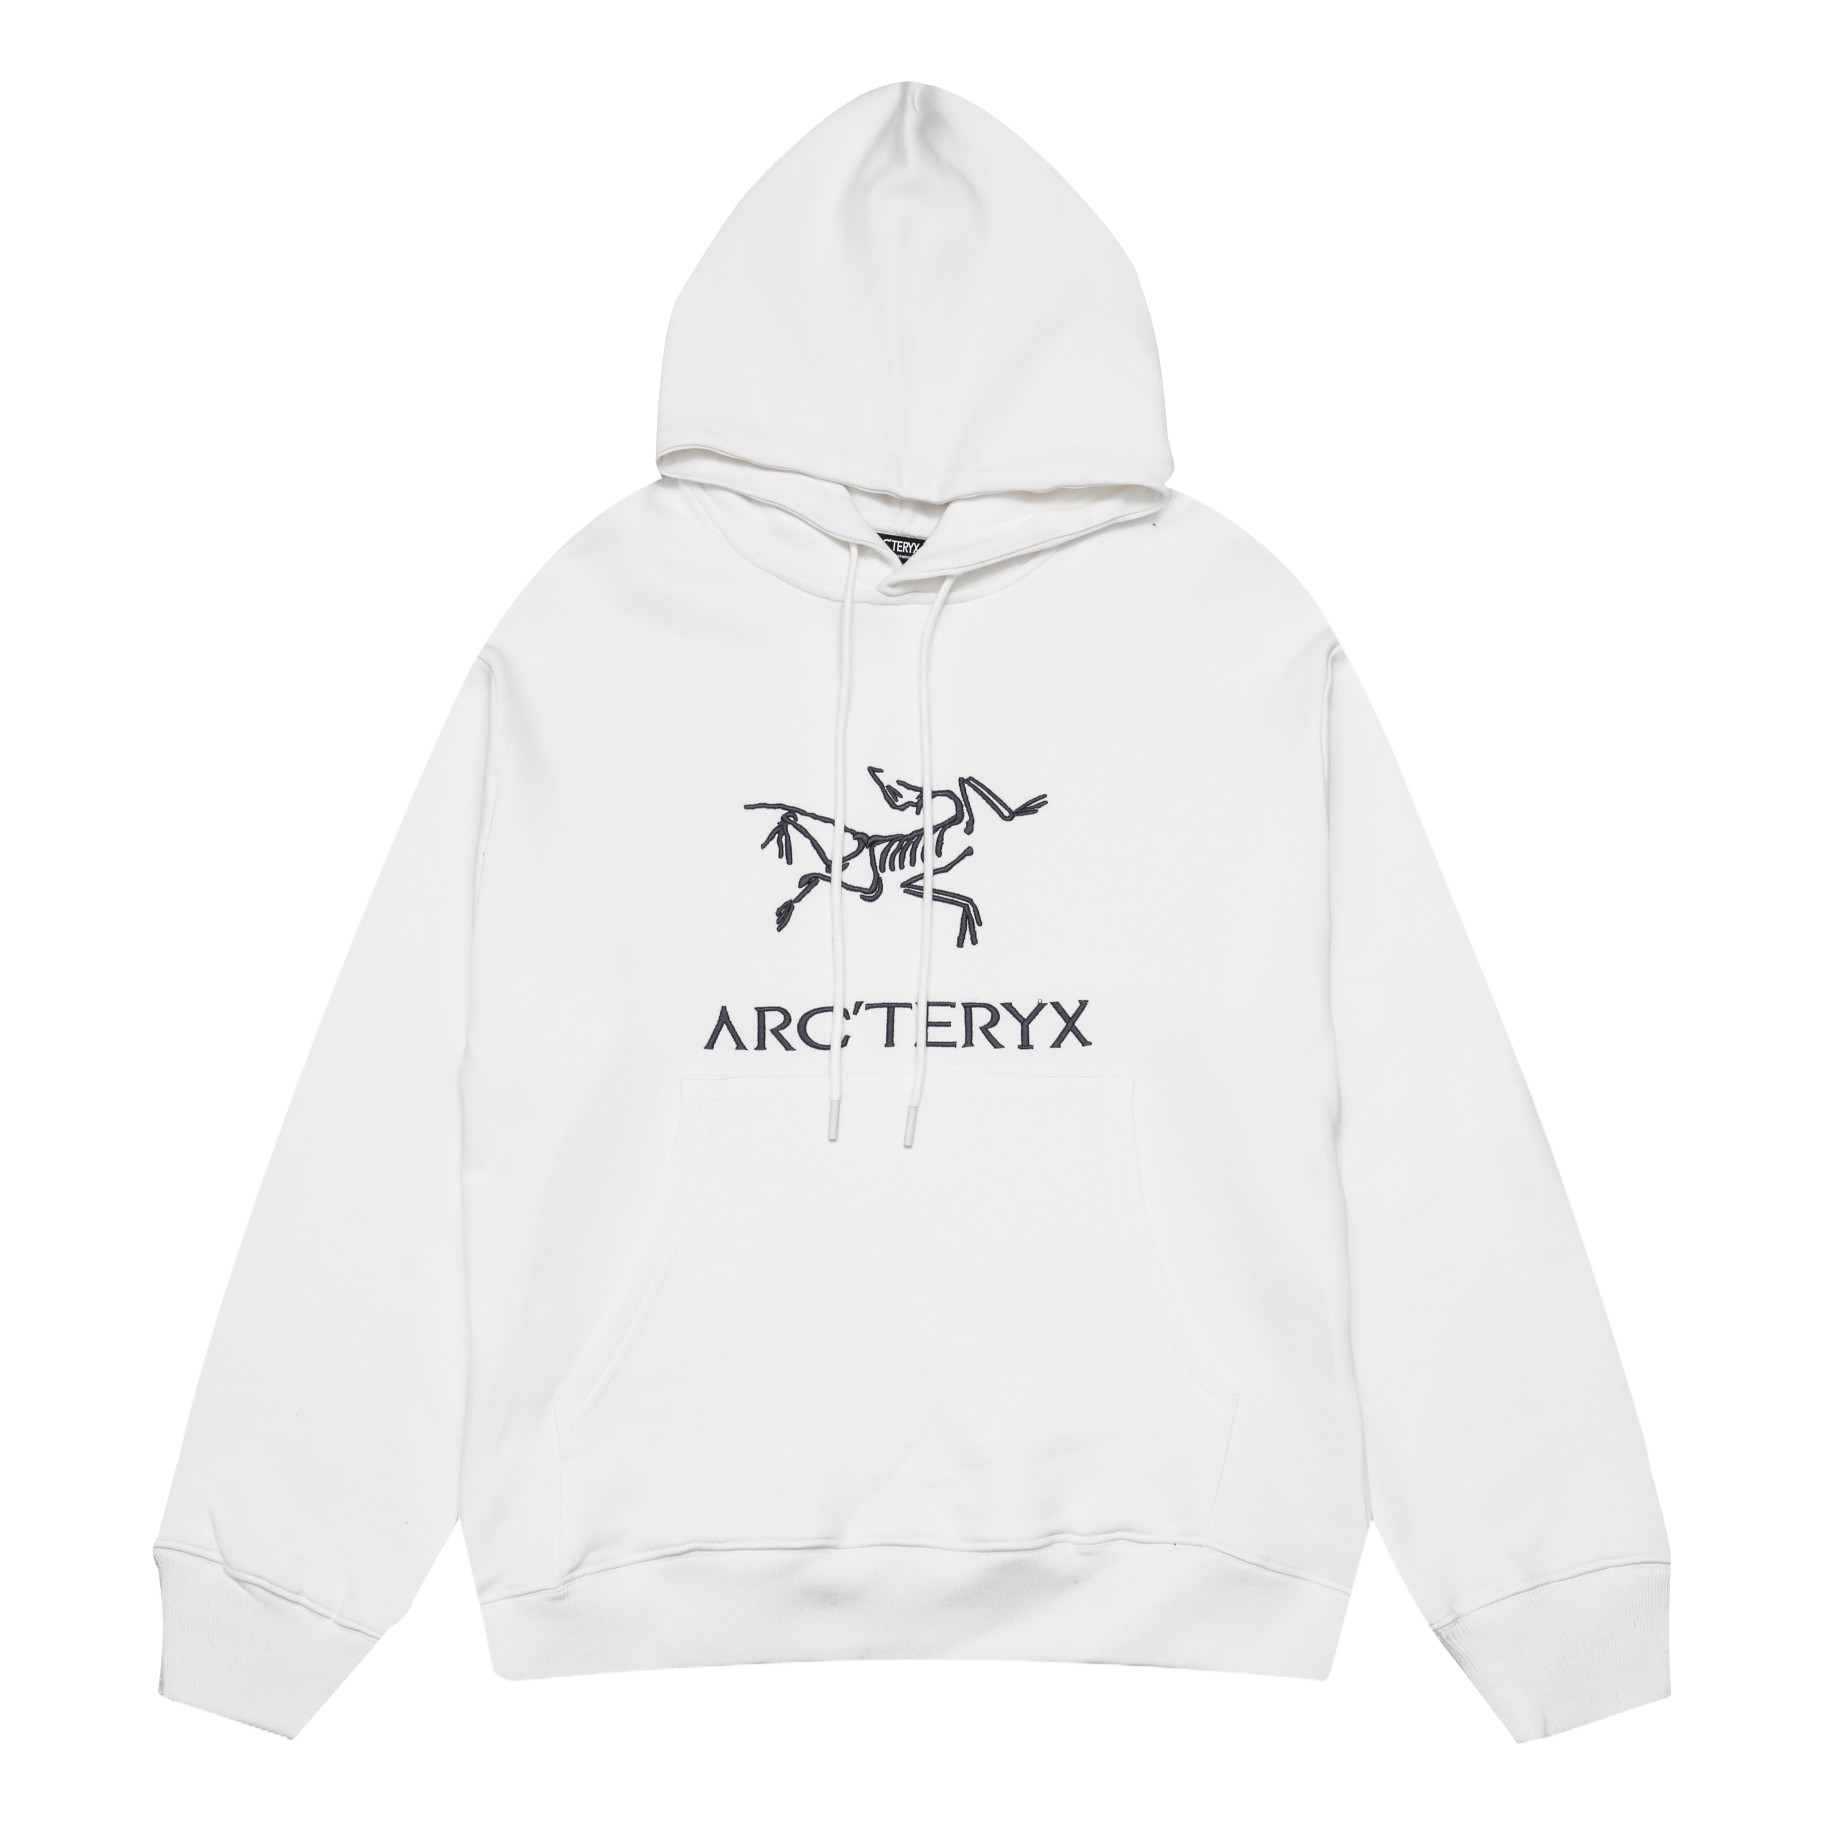 High Quality Online
 Arc’teryx Designer
 Clothing Sweatshirts Black White Embroidery Cotton Hooded Top